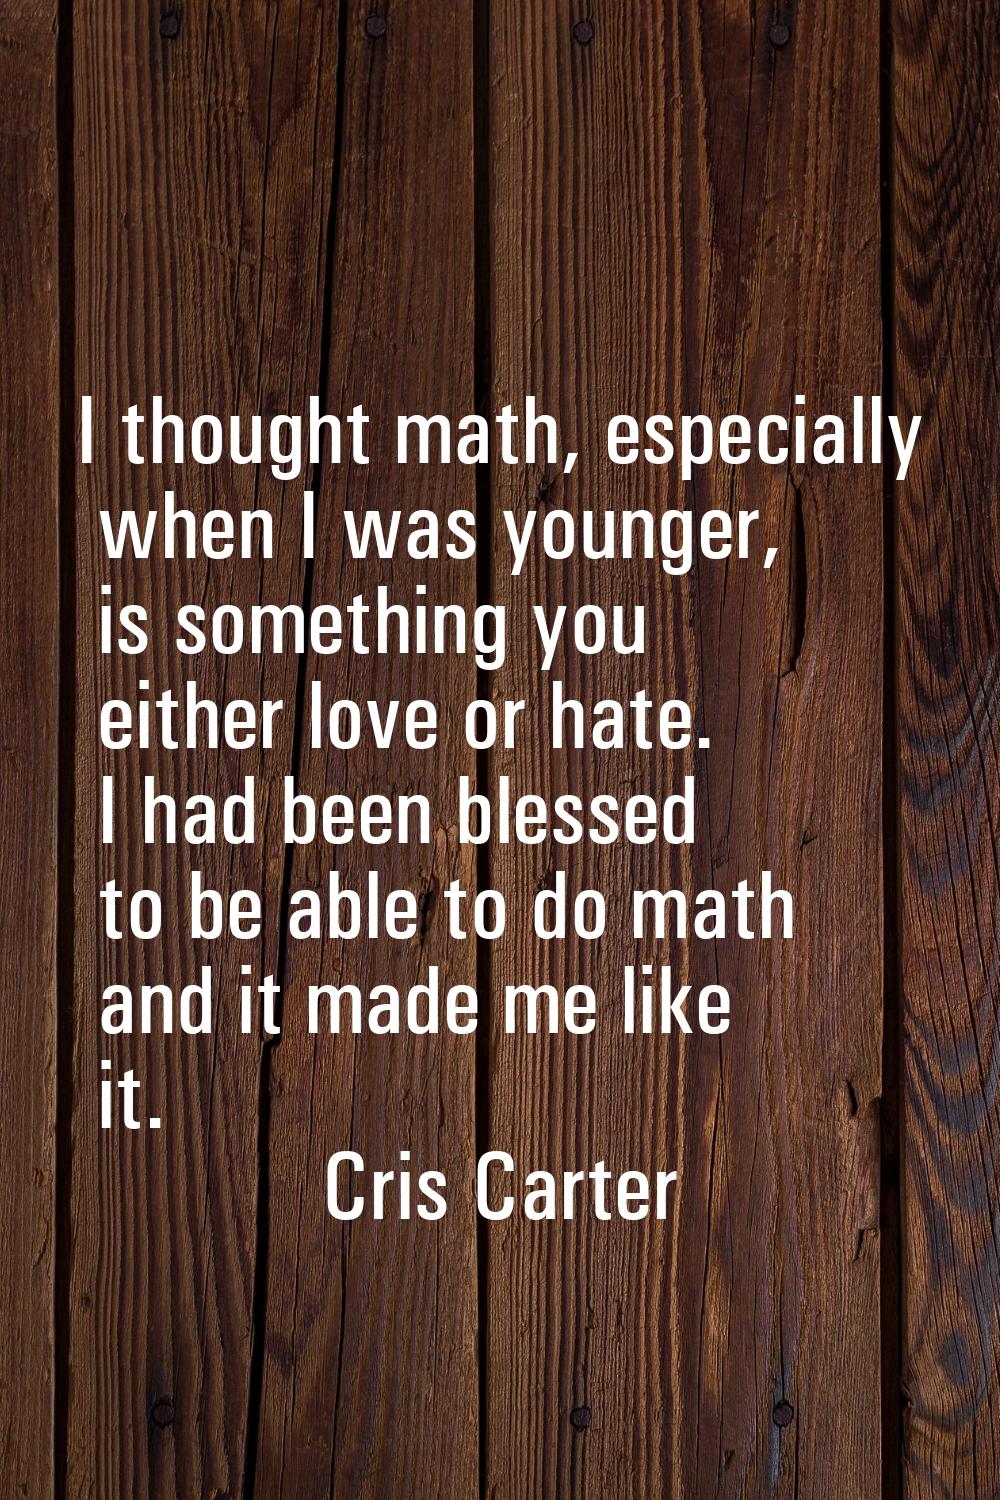 I thought math, especially when I was younger, is something you either love or hate. I had been ble